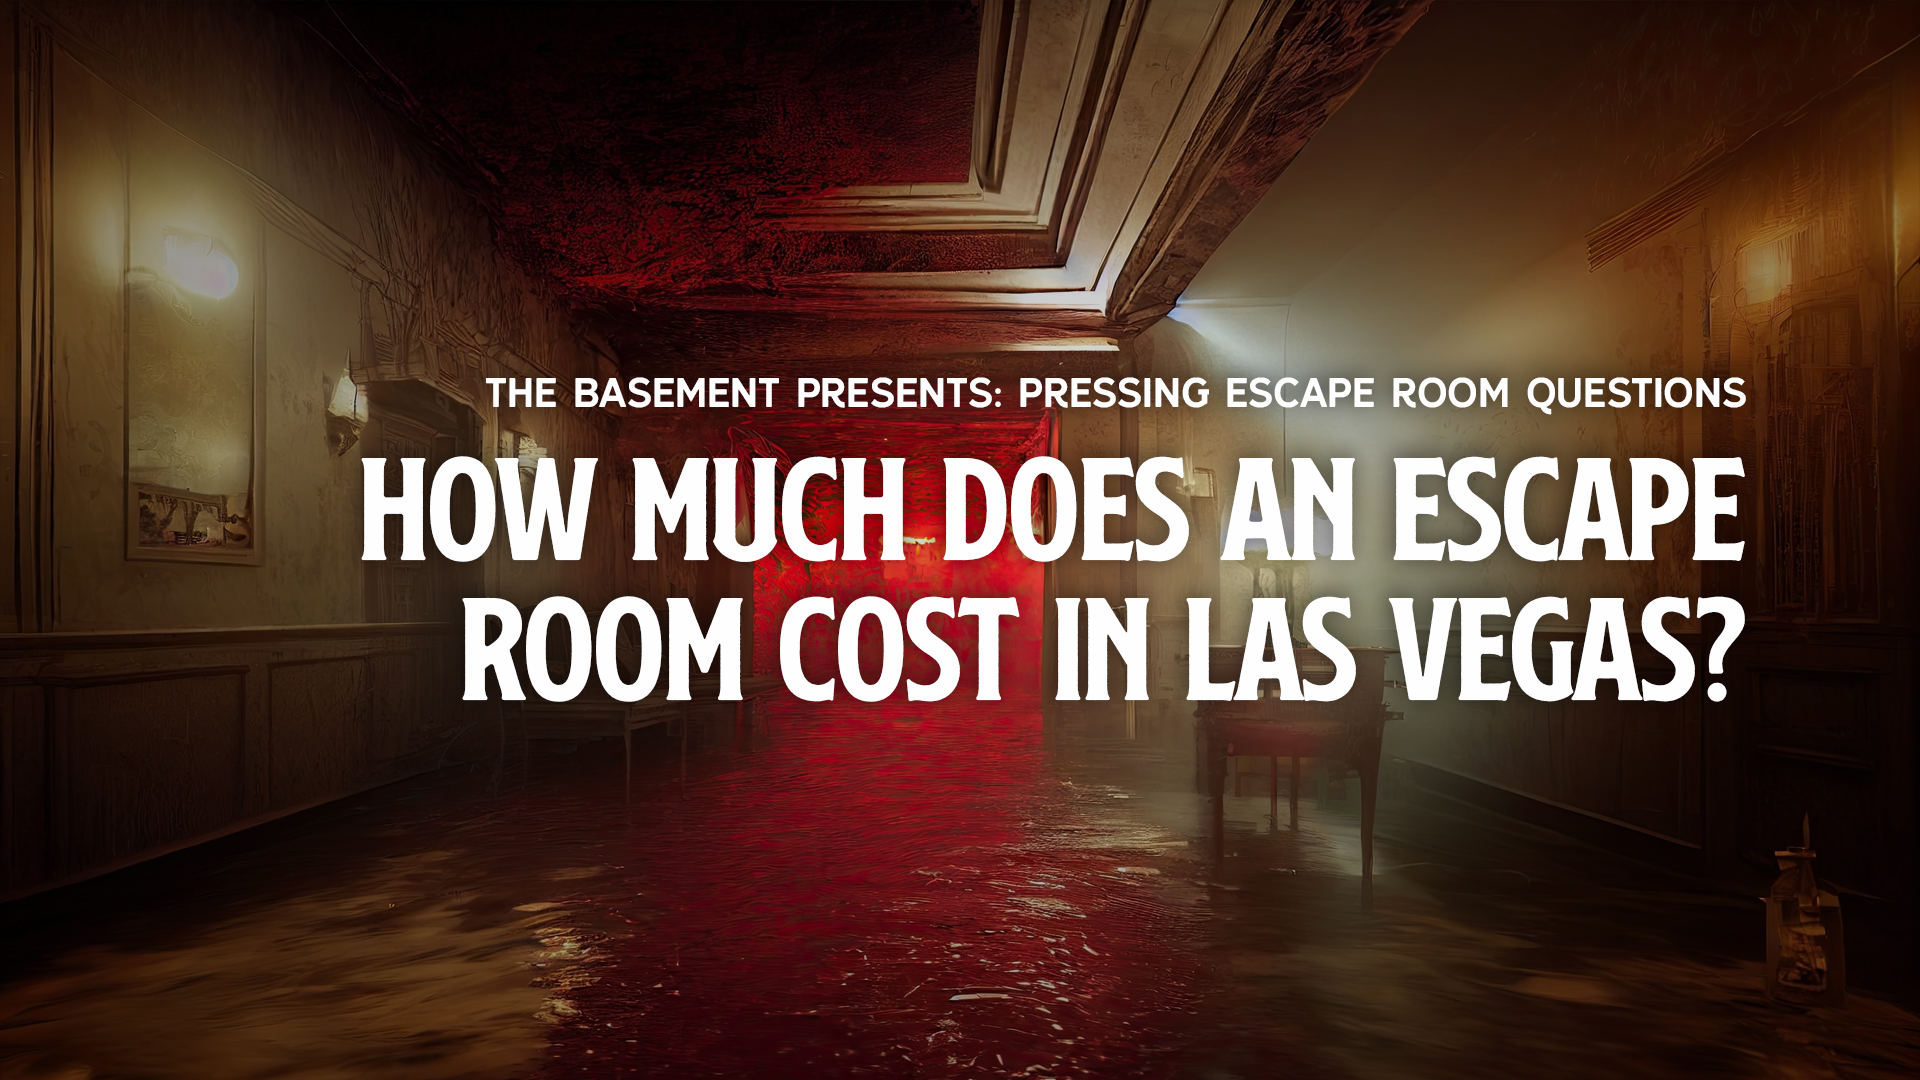 How Much Does An Escape Room Cost in Las Vegas?